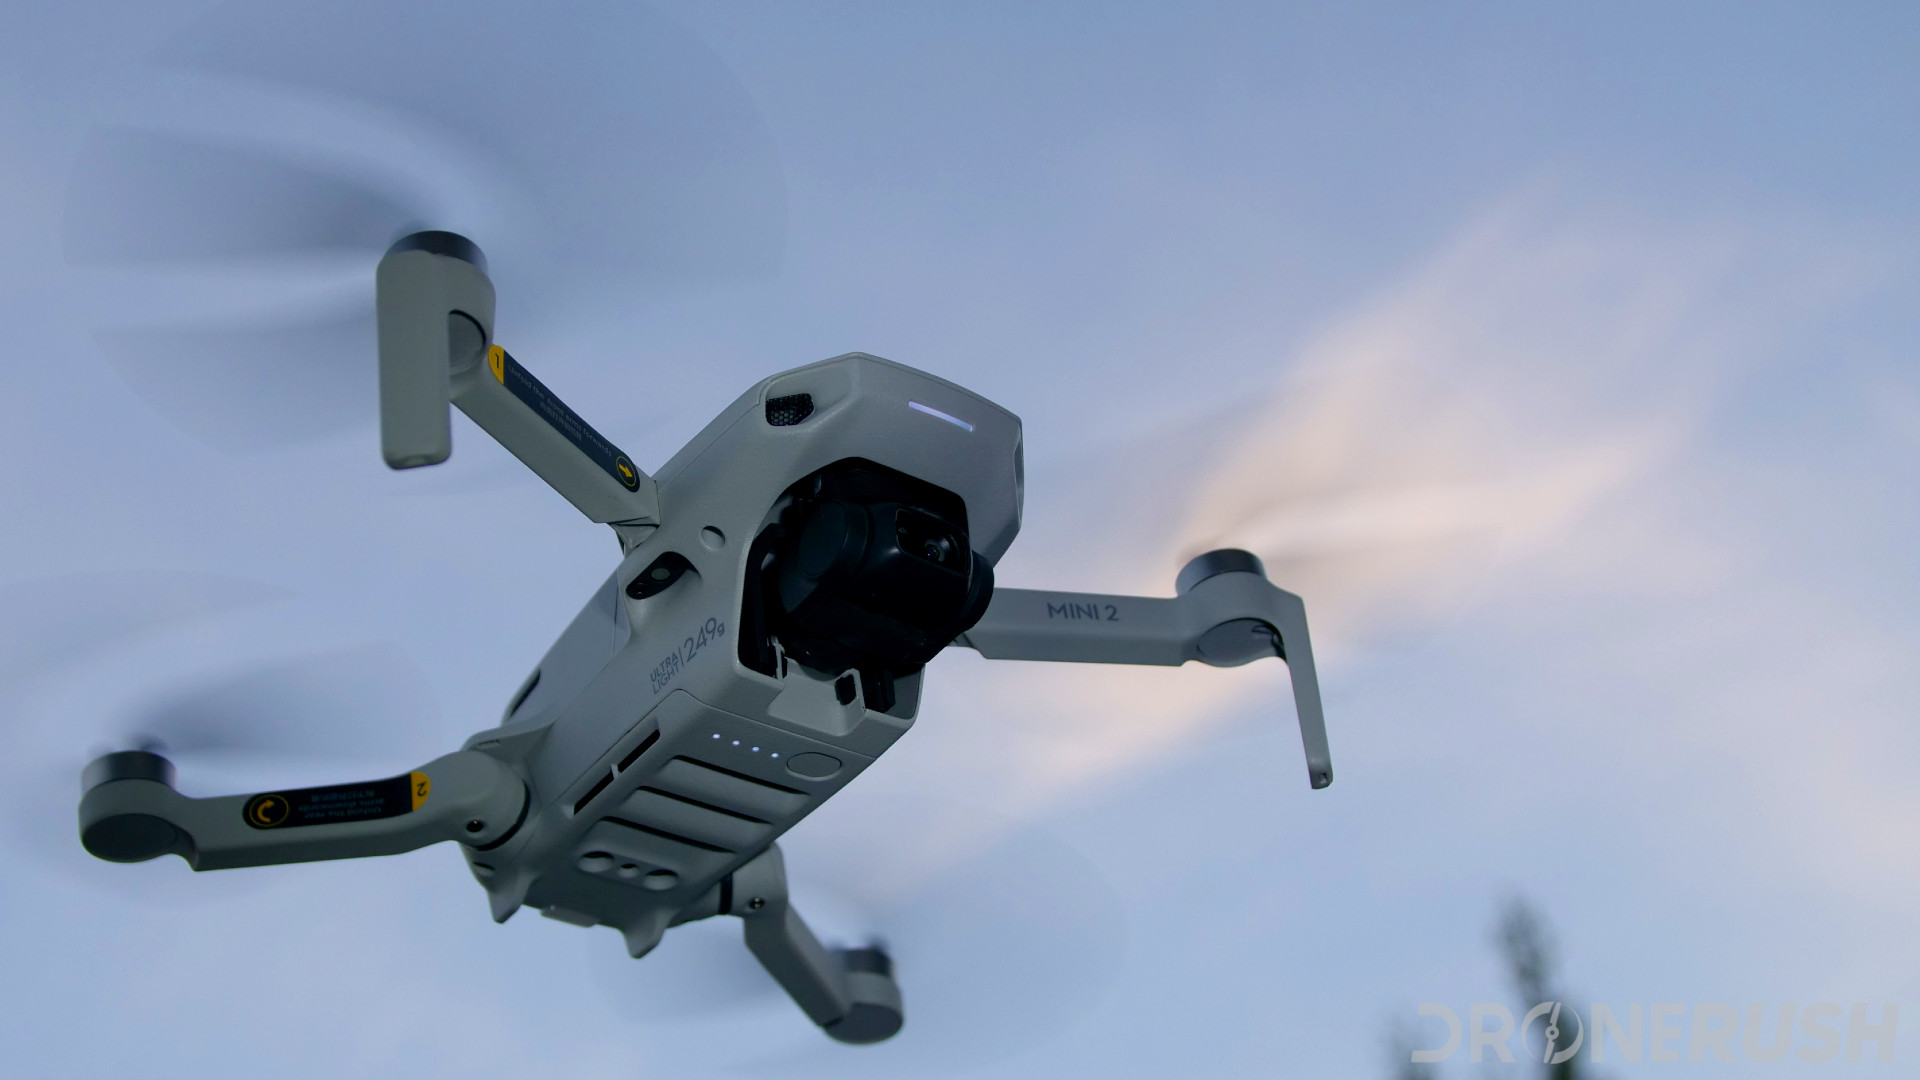 DJI Mini 2 Review: Is it the Best Small Drone to Travel With?